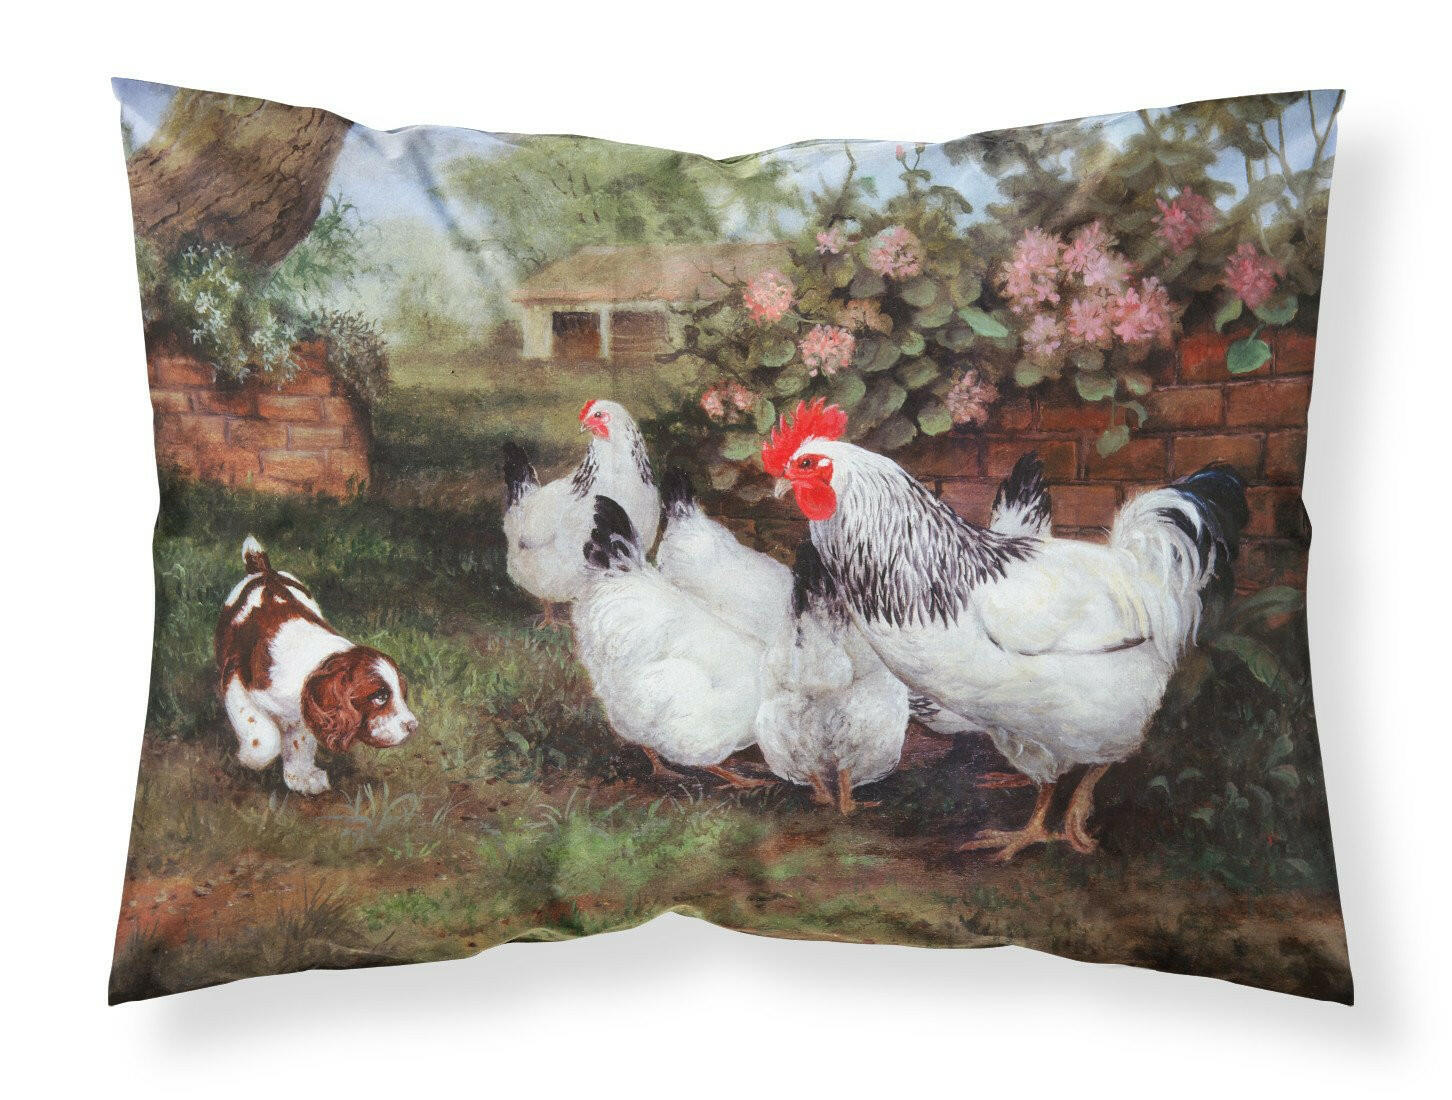 Chickens, Hens and Puppy Fabric Standard Pillowcase HEH0003PILLOWCASE by Caroline's Treasures